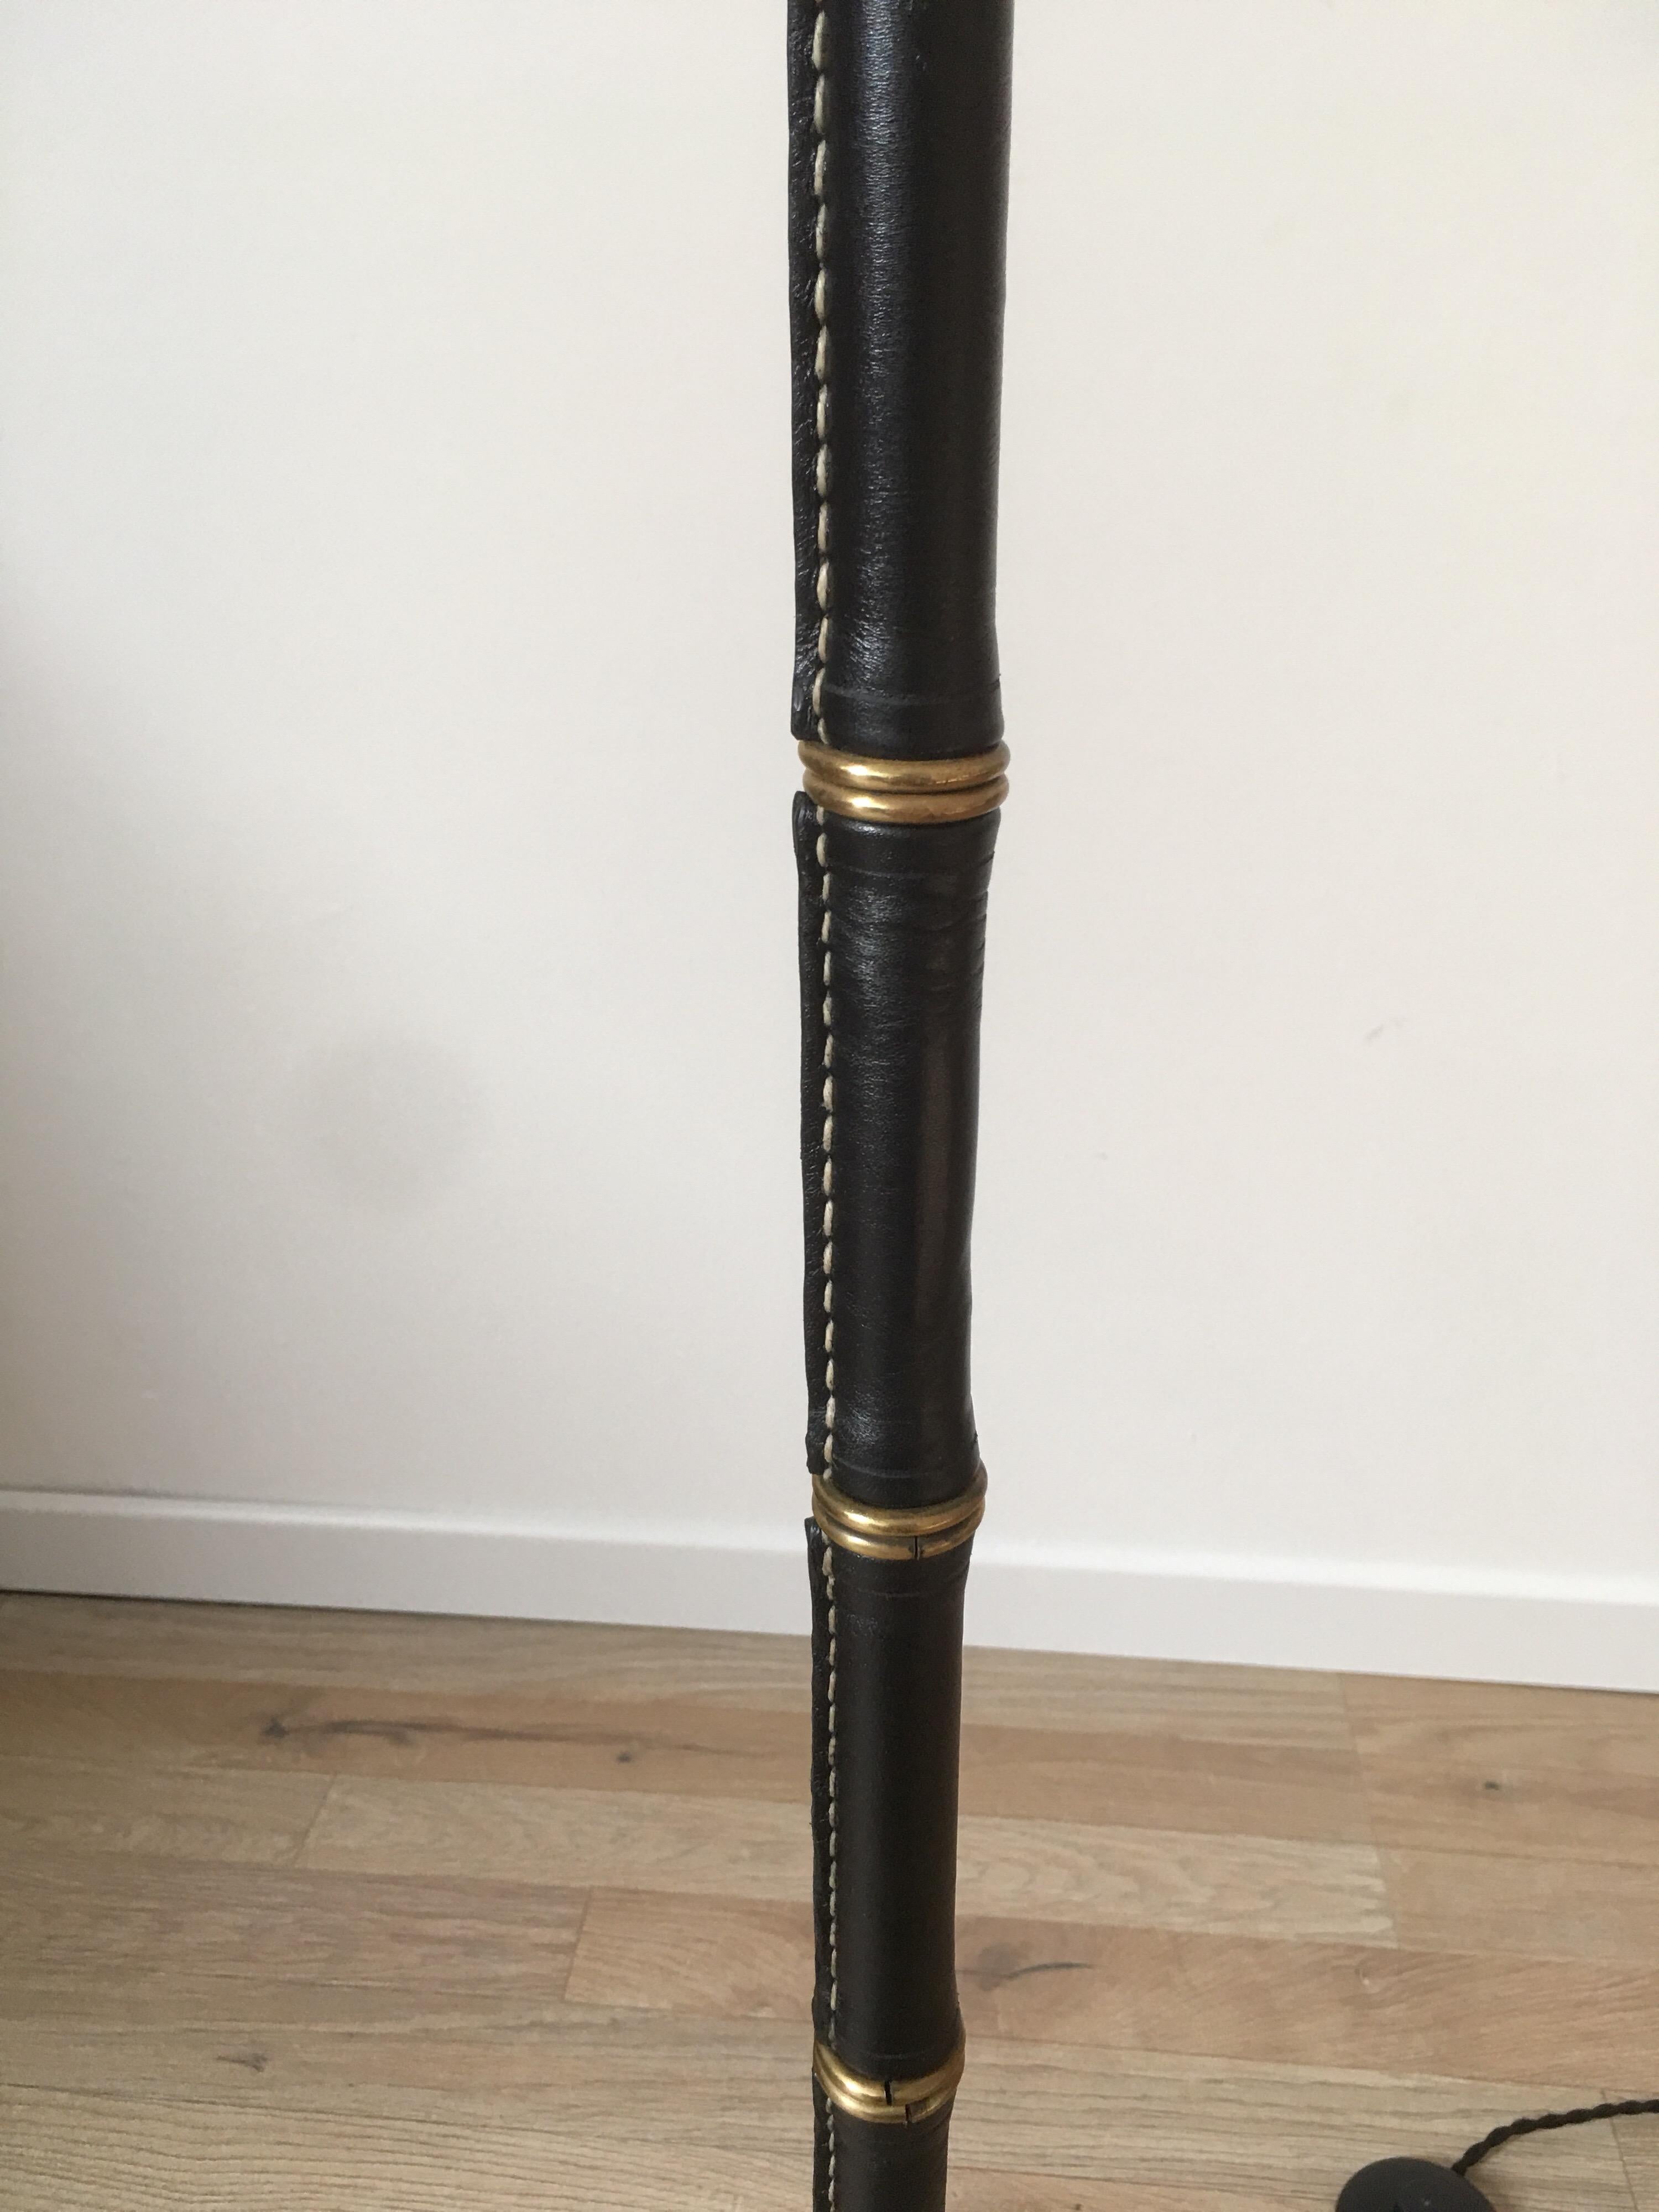 Jacques Adnet Black Stitched Leather Floor Lamp, Bamboo Form, French, 1950s For Sale 2